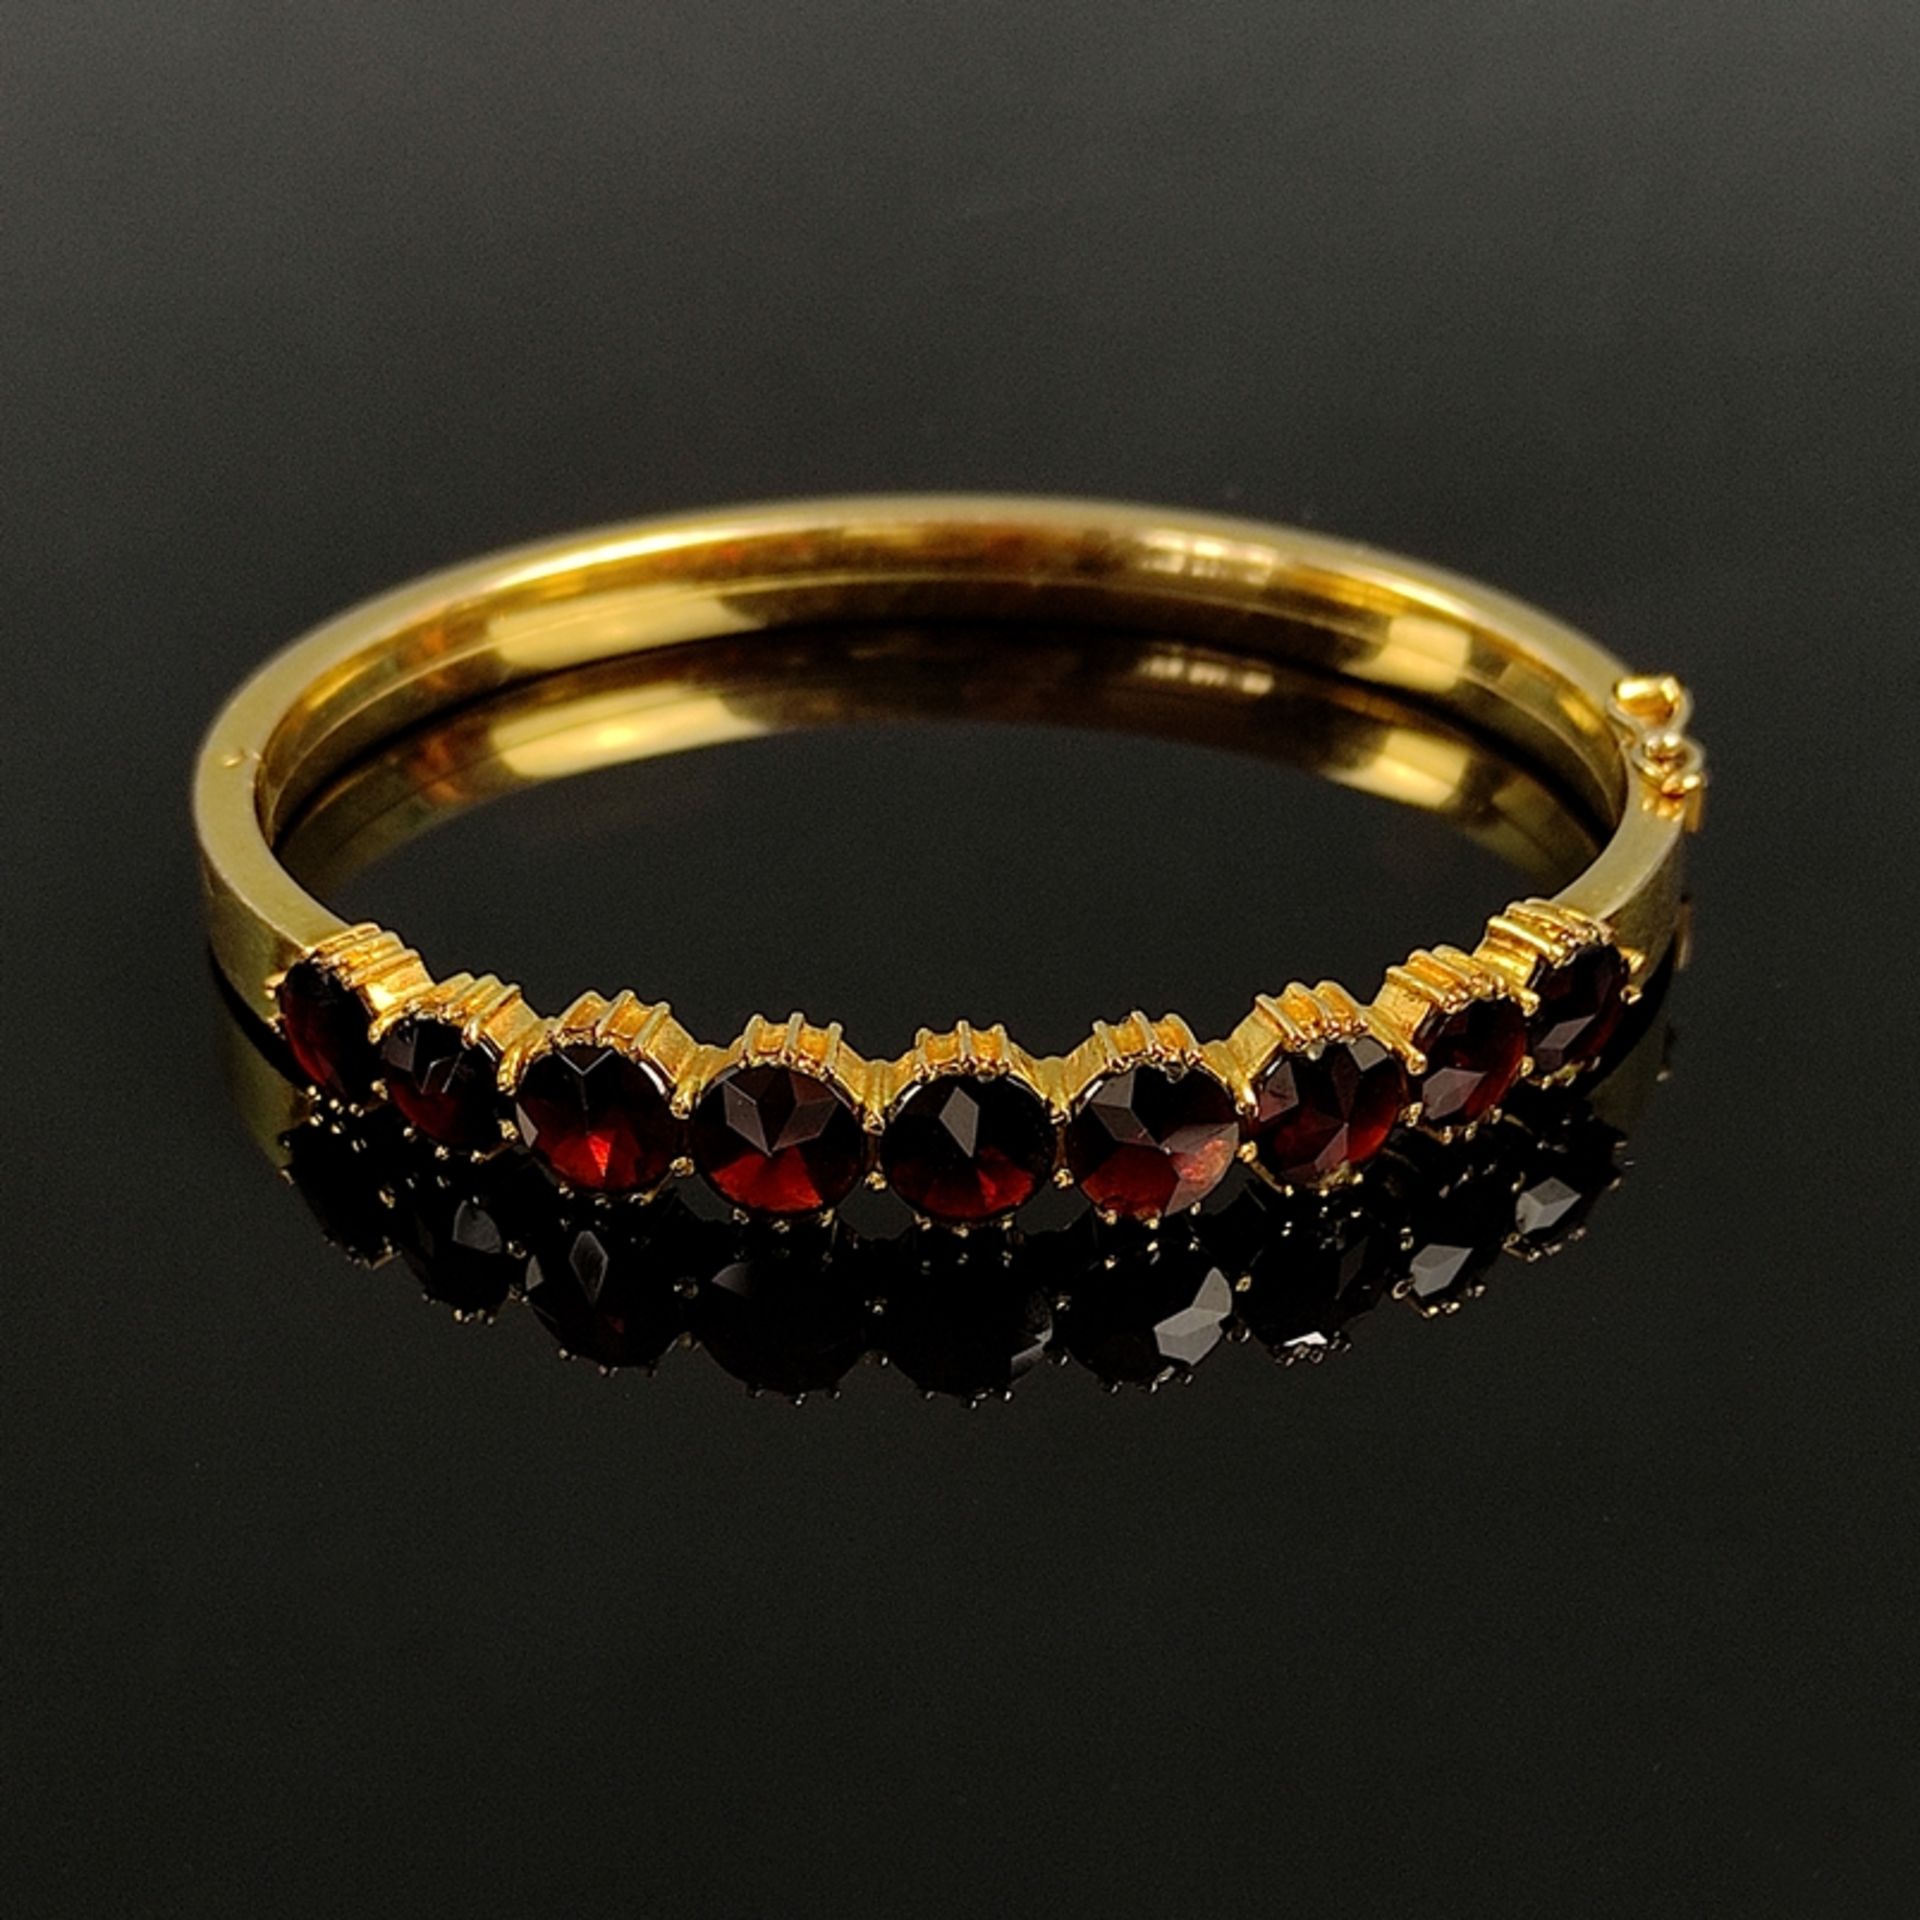 Antique garnet-gold bangle, standard gold (250/1000), 15,6g, bangle with hinge and tongue clasp wit